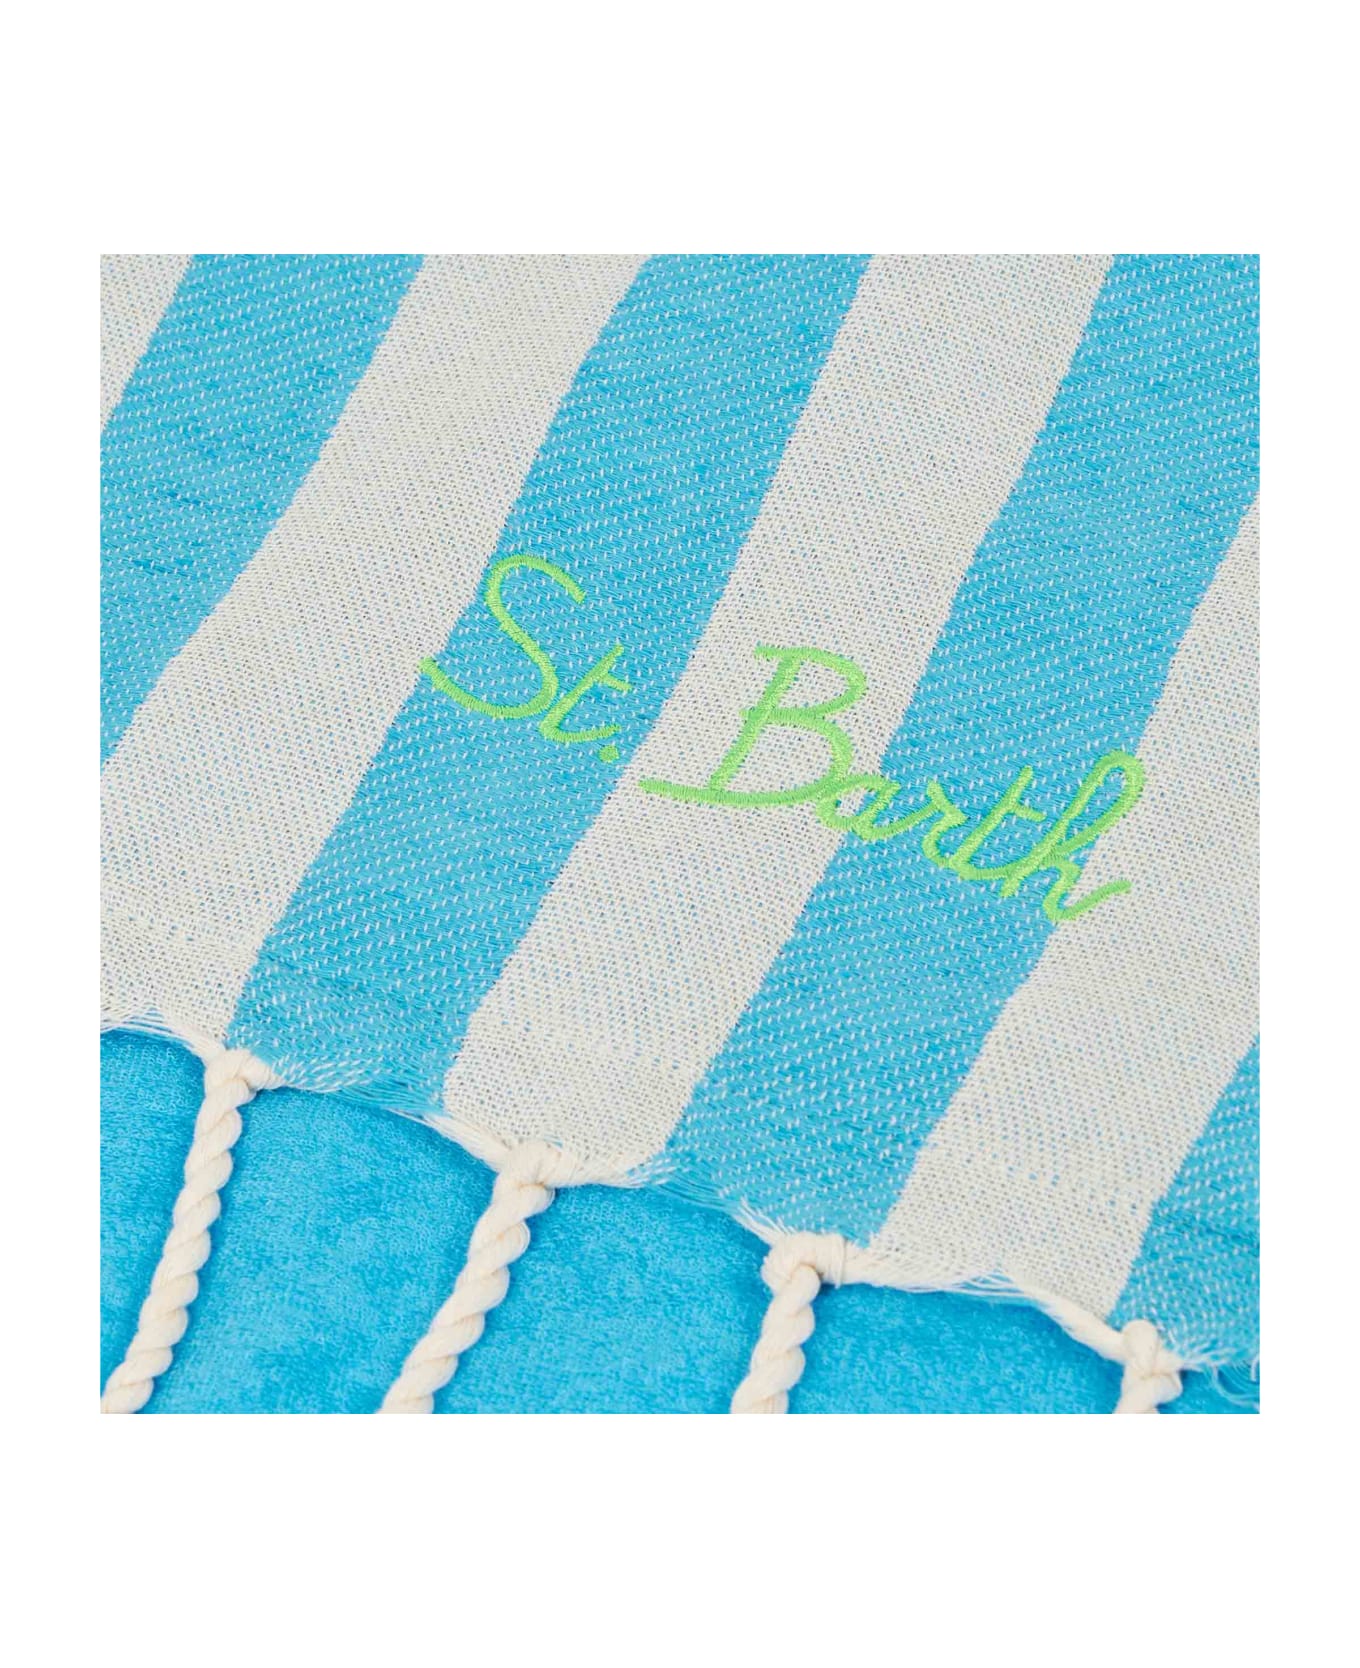 MC2 Saint Barth Classic Foutas Doubled With Soft Polyester Sponge And Striped - BLUE ビーチタオル